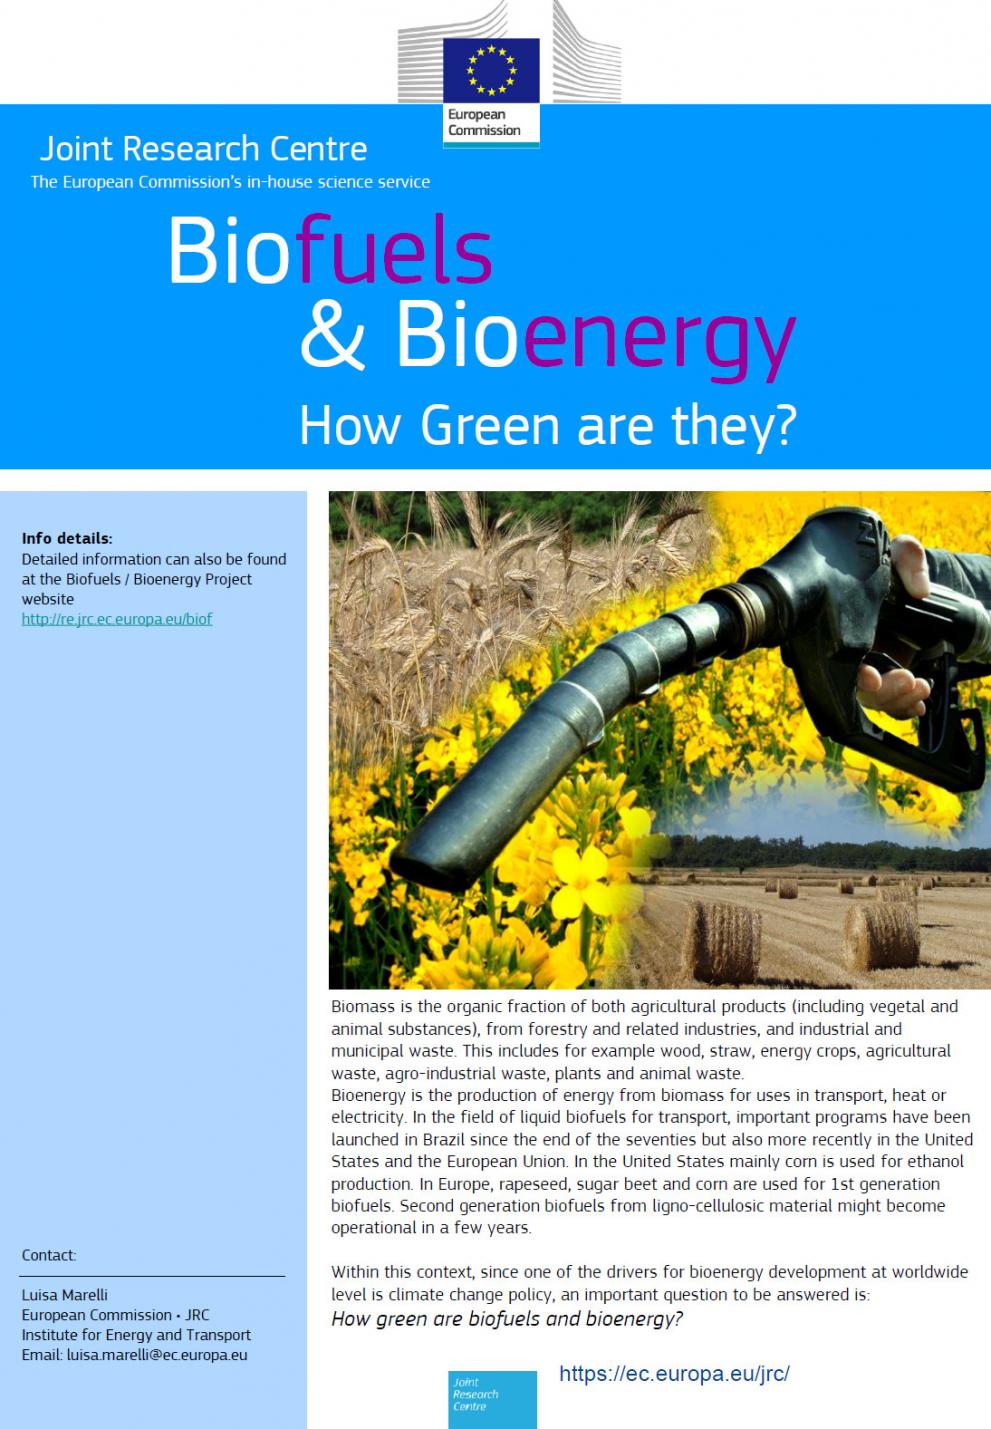 Biofuels and Bioenergy: how green are they?